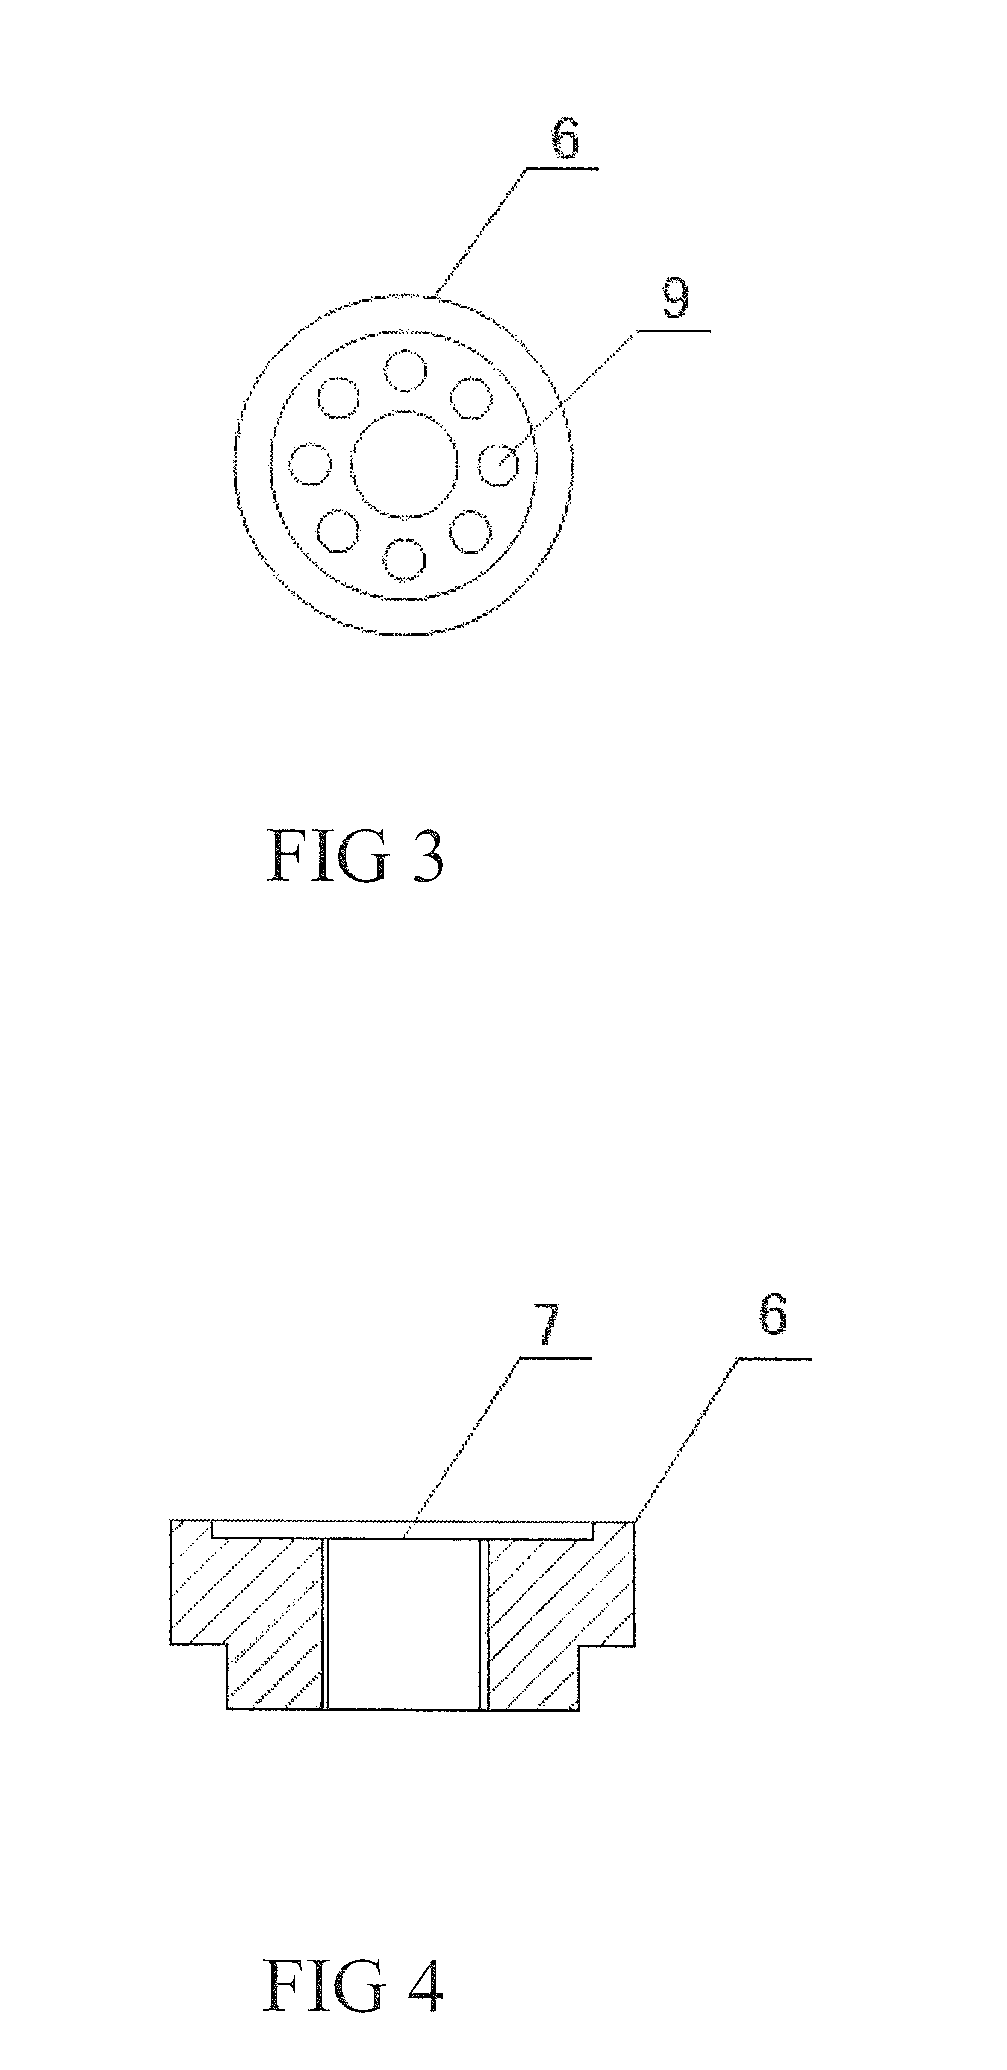 Method for Reliably Soldering Microwave Dielectric Ceramics with Metal